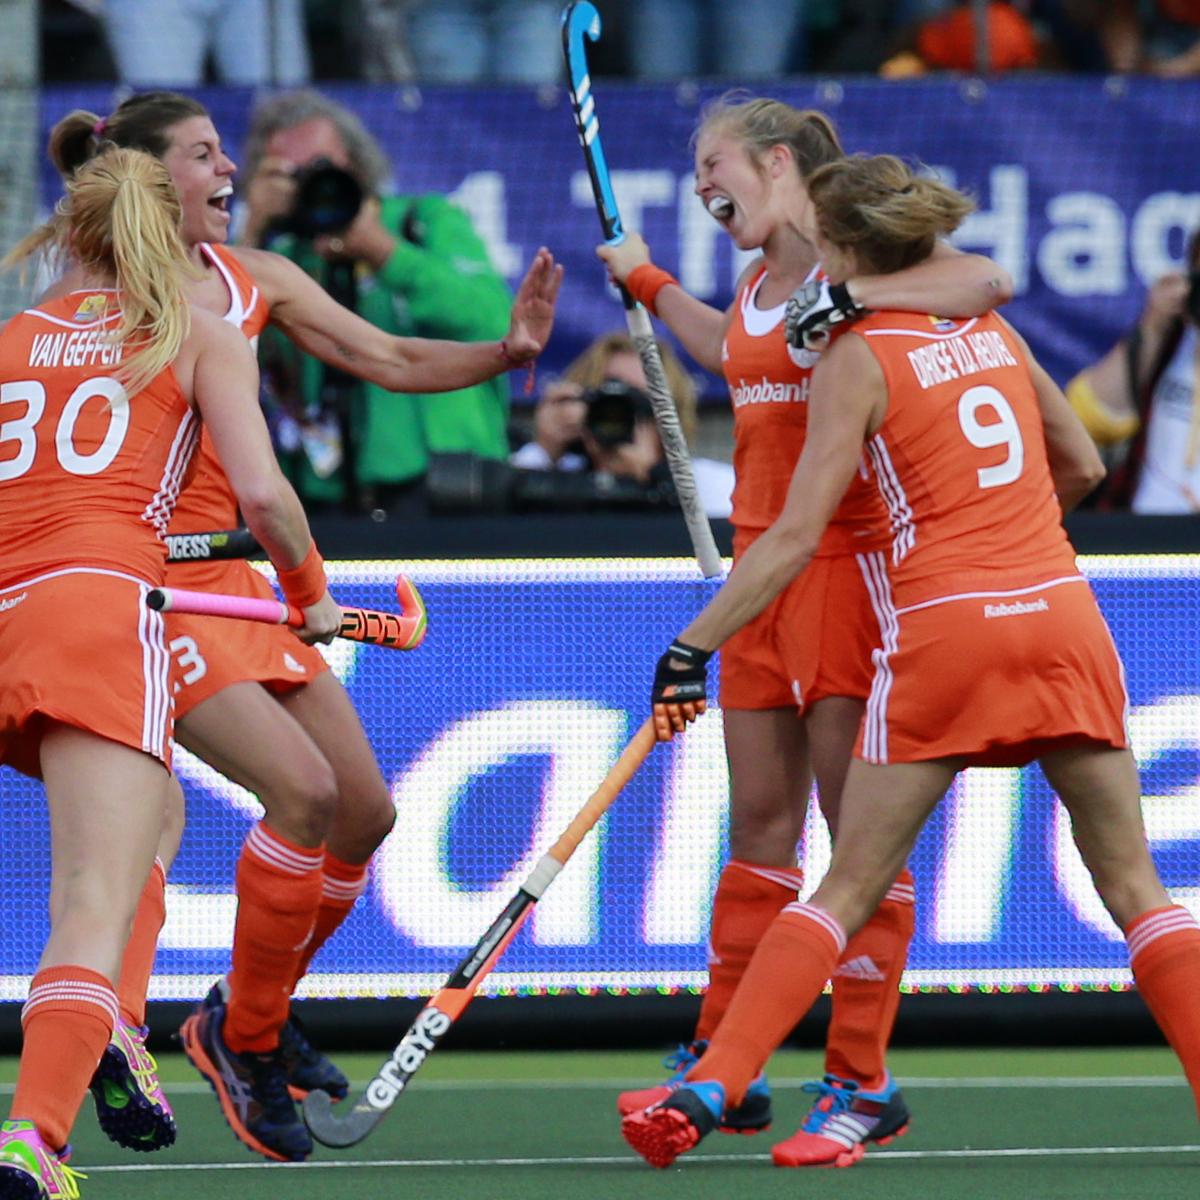 Women's Hockey World Cup Final 2014: Preview for Netherlands vs ...